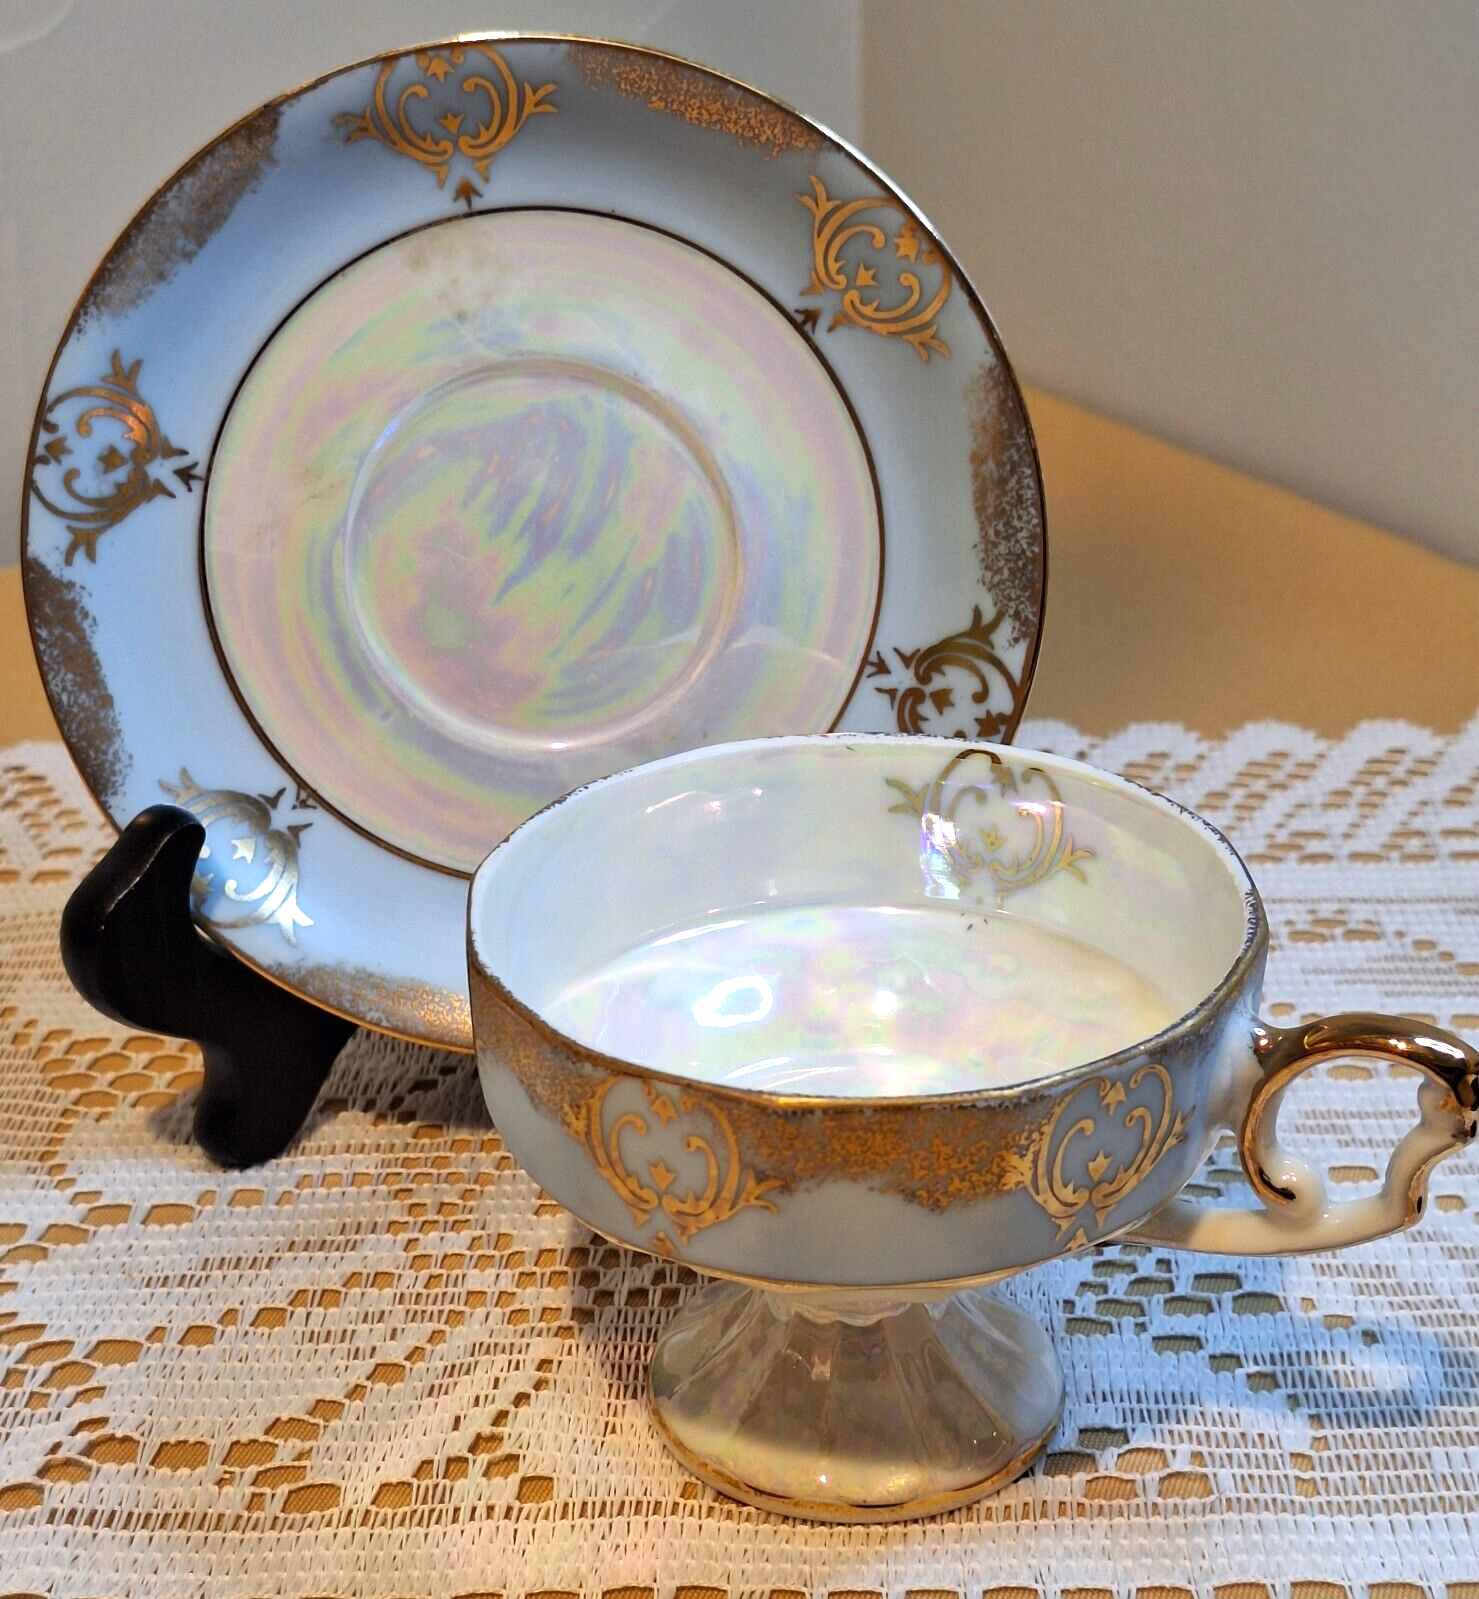 Vintage Shefford Iridescent Footed Teal and Gold Pedestal Cup and Saucer, Japan